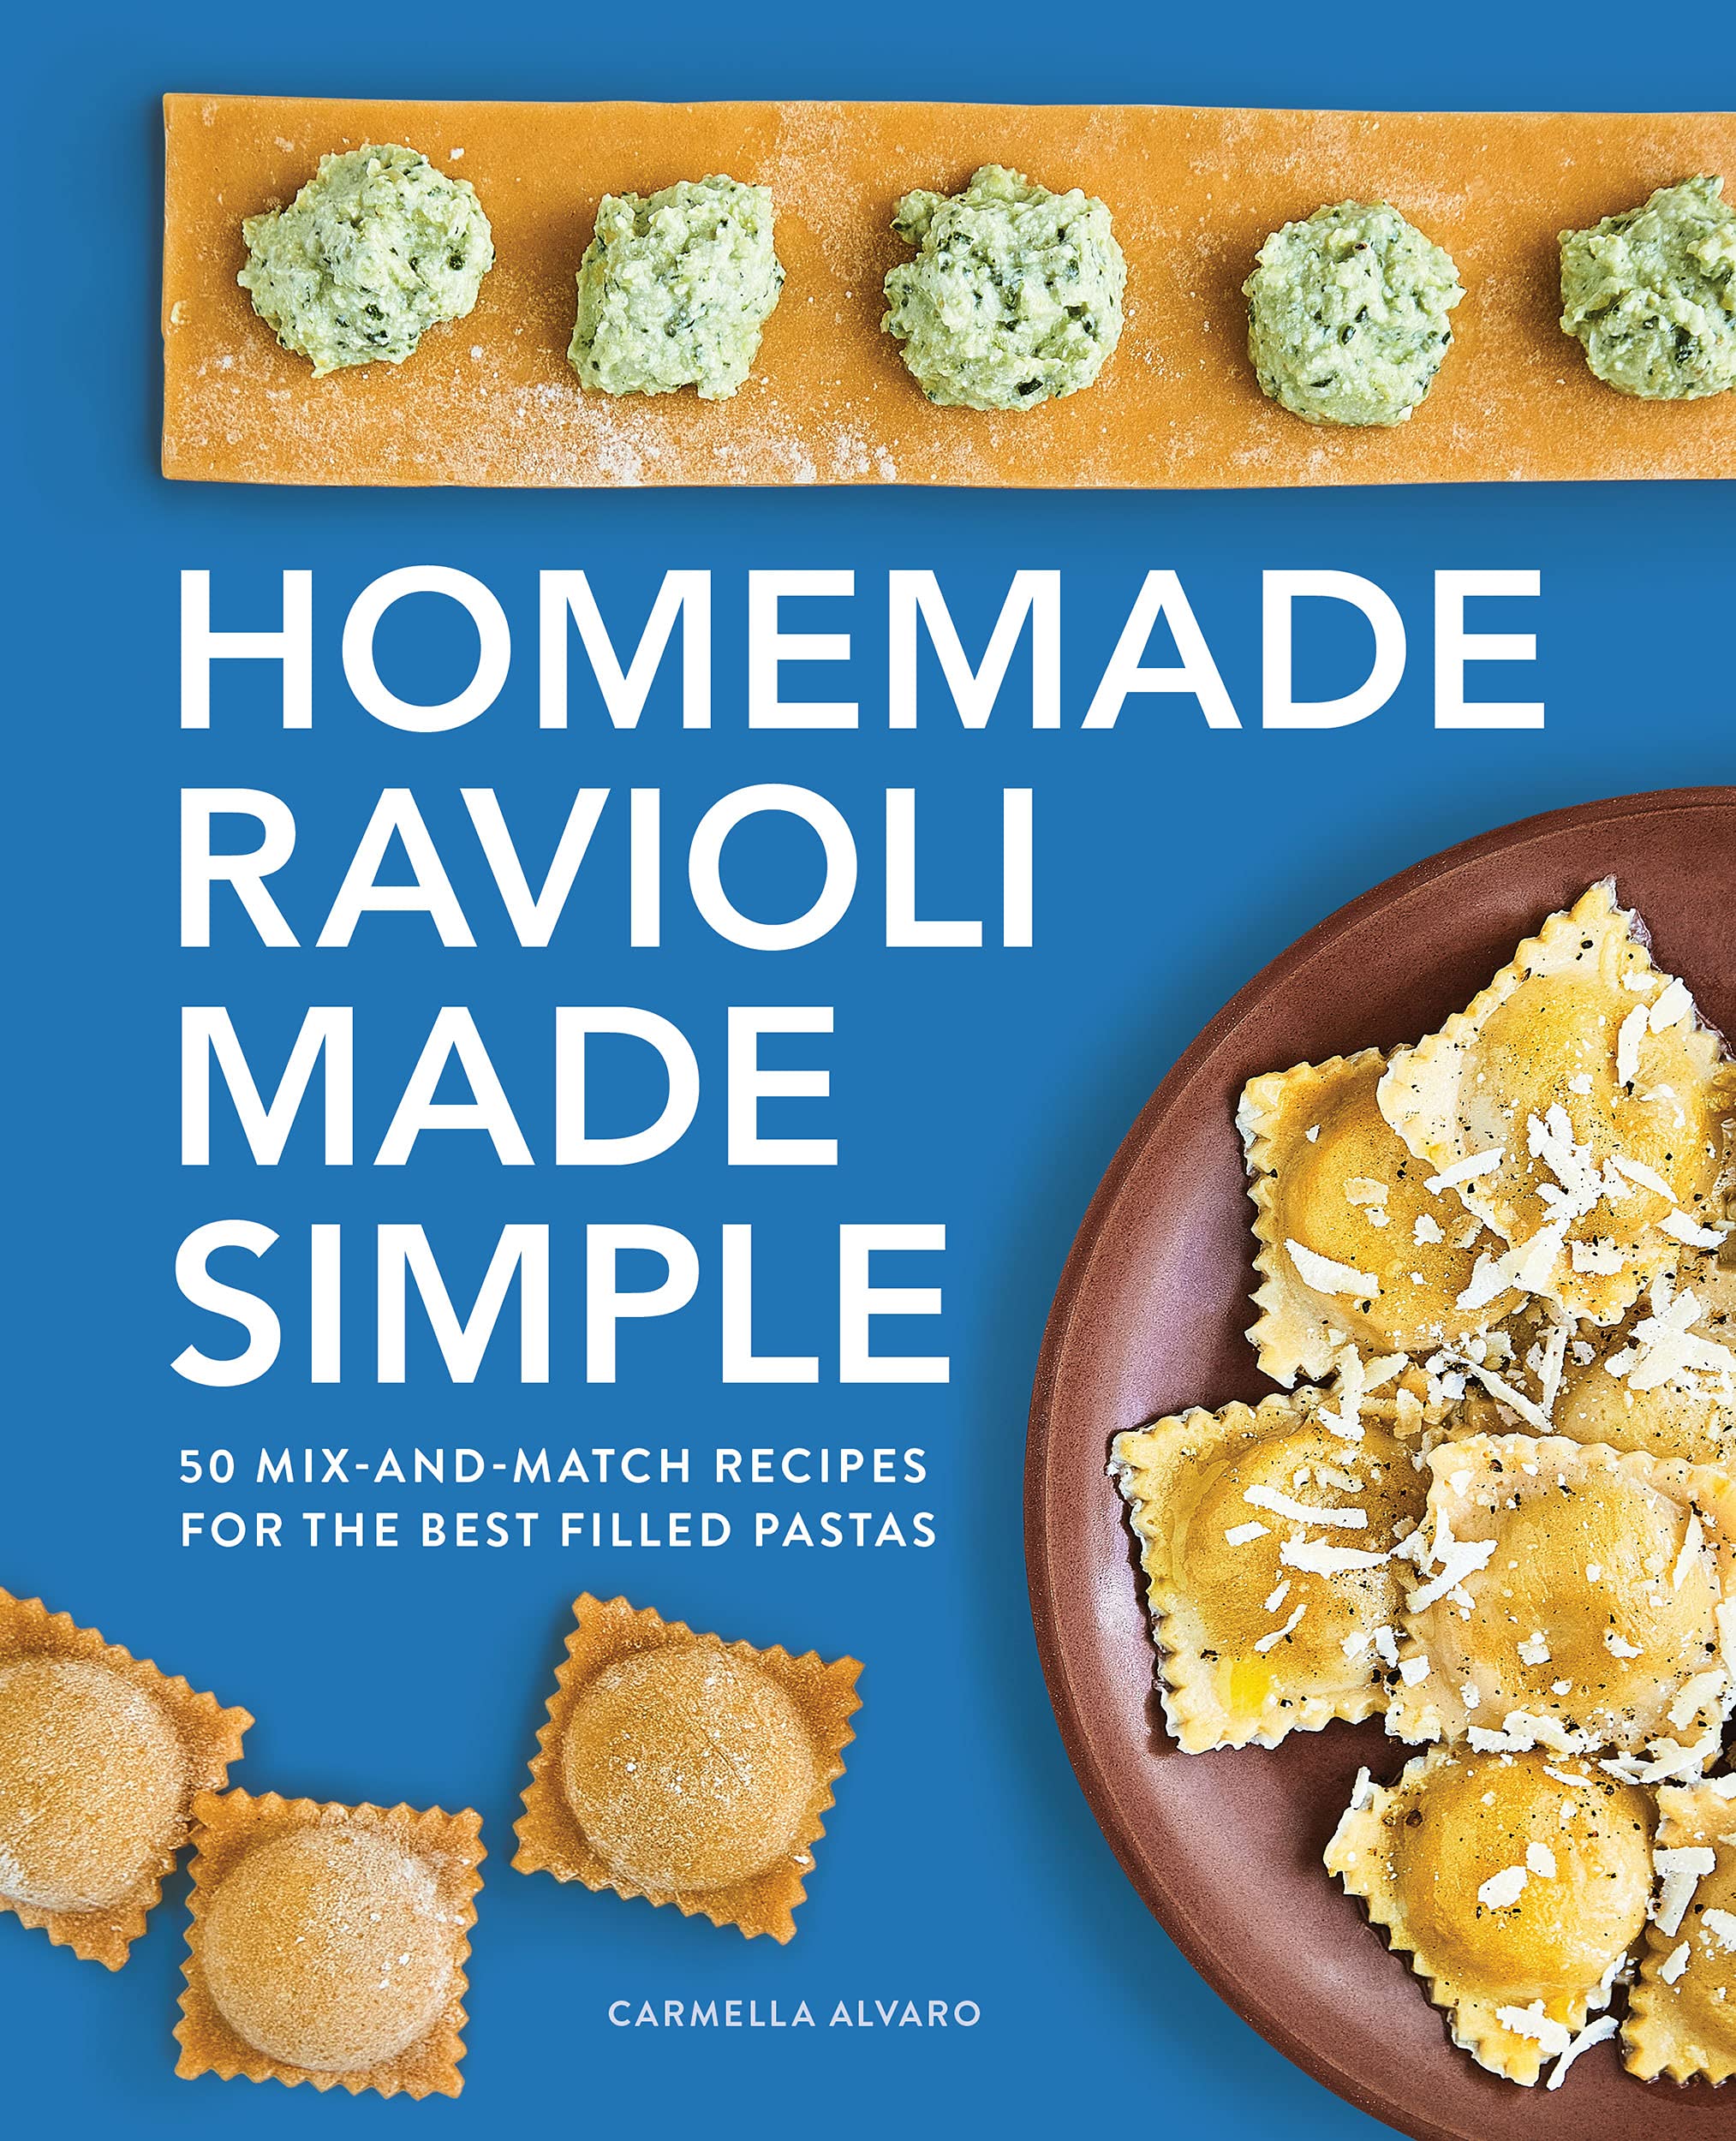 Homemade Ravioli Made Simple: 50 Mix-and-Match Recipes for the Best Filled Pastas (Carmella Alvaro)